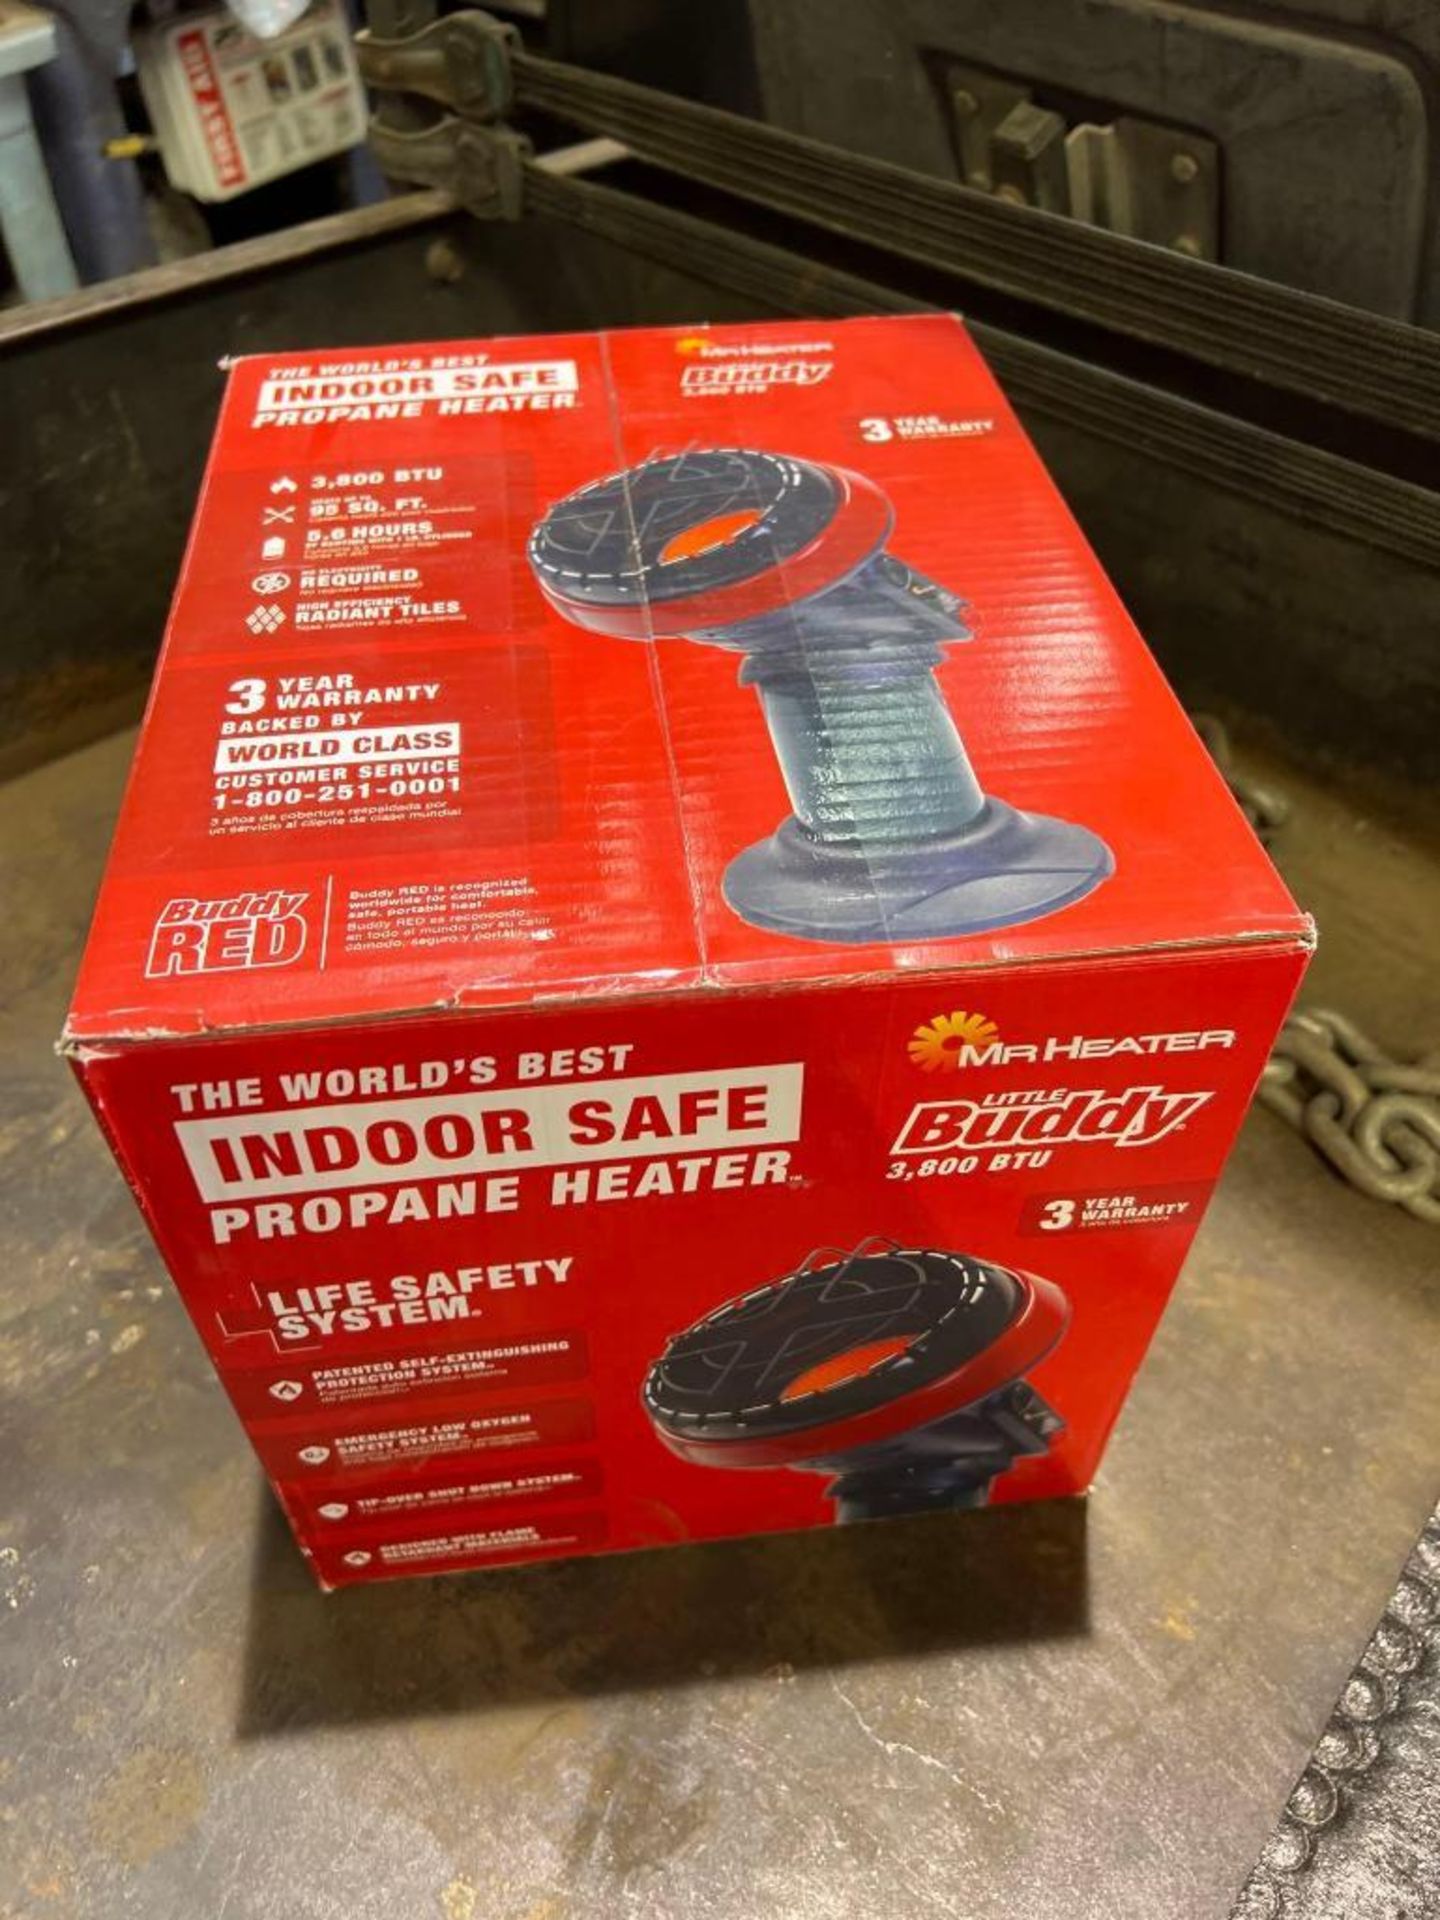 Buddy Red Indoor Safe Propane Heater - Image 2 of 3